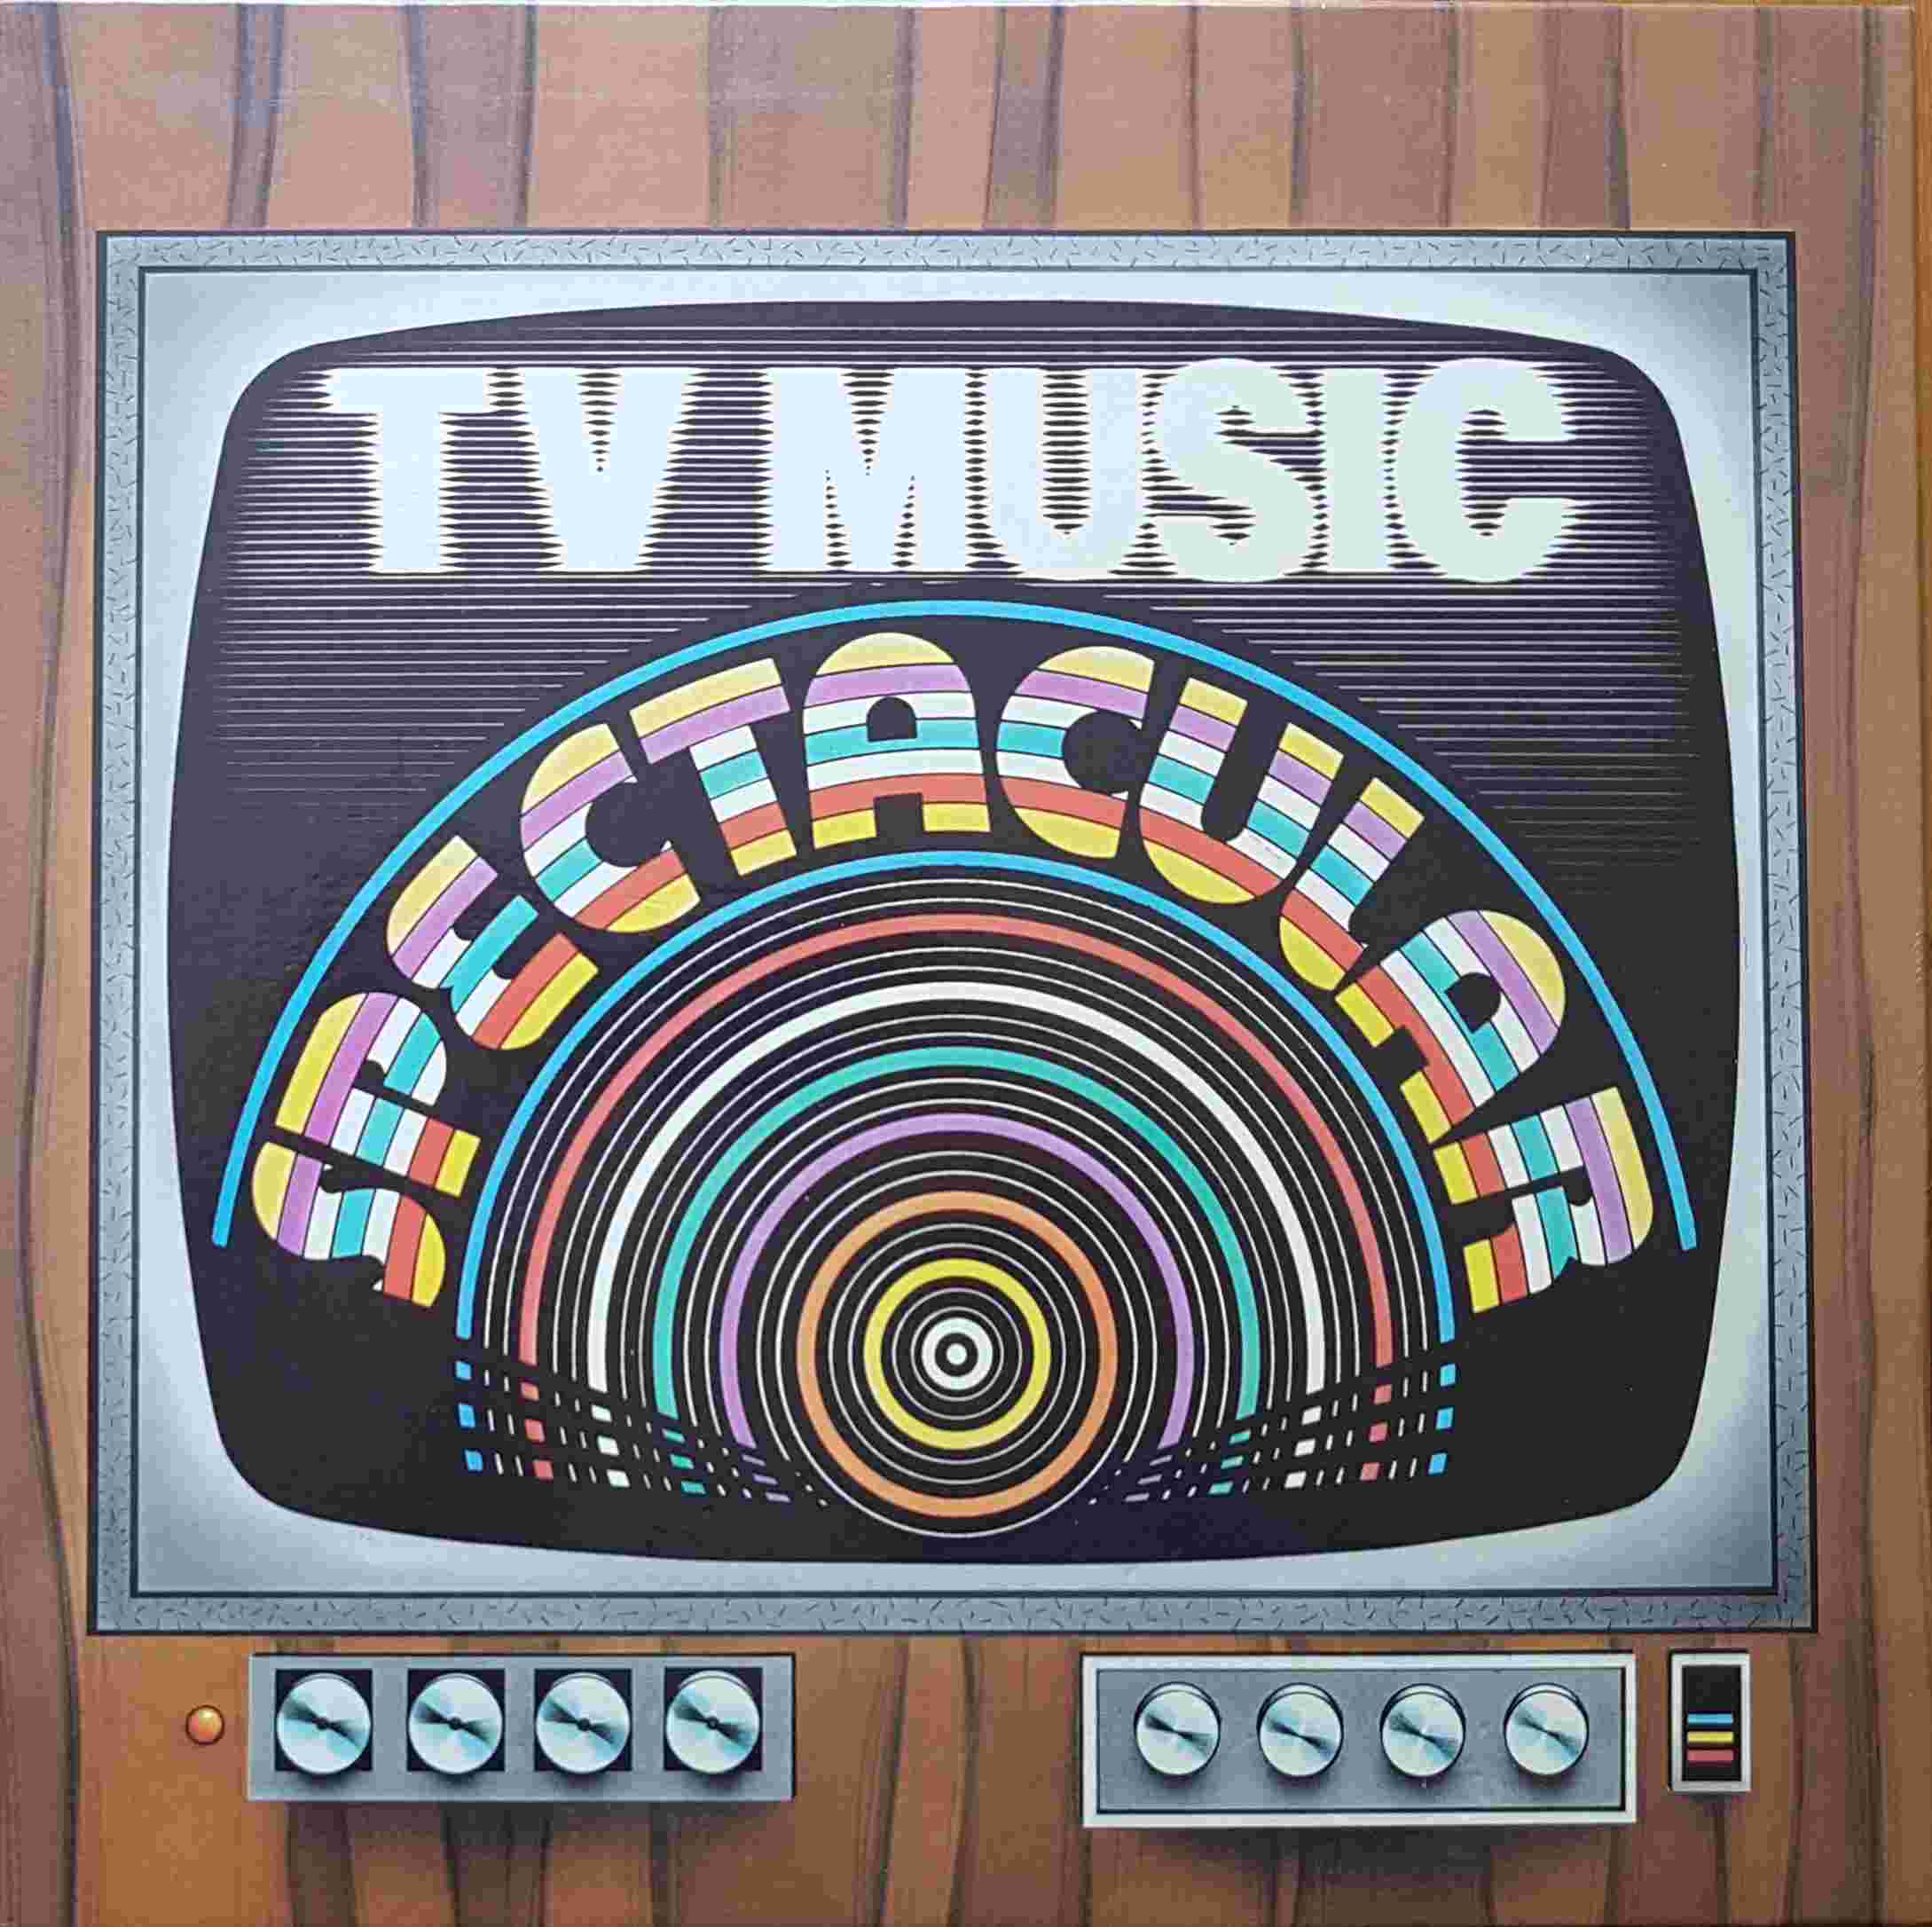 Picture of GTVS 8B TV music spectacular by artist Various from ITV, Channel 4 and Channel 5 albums library